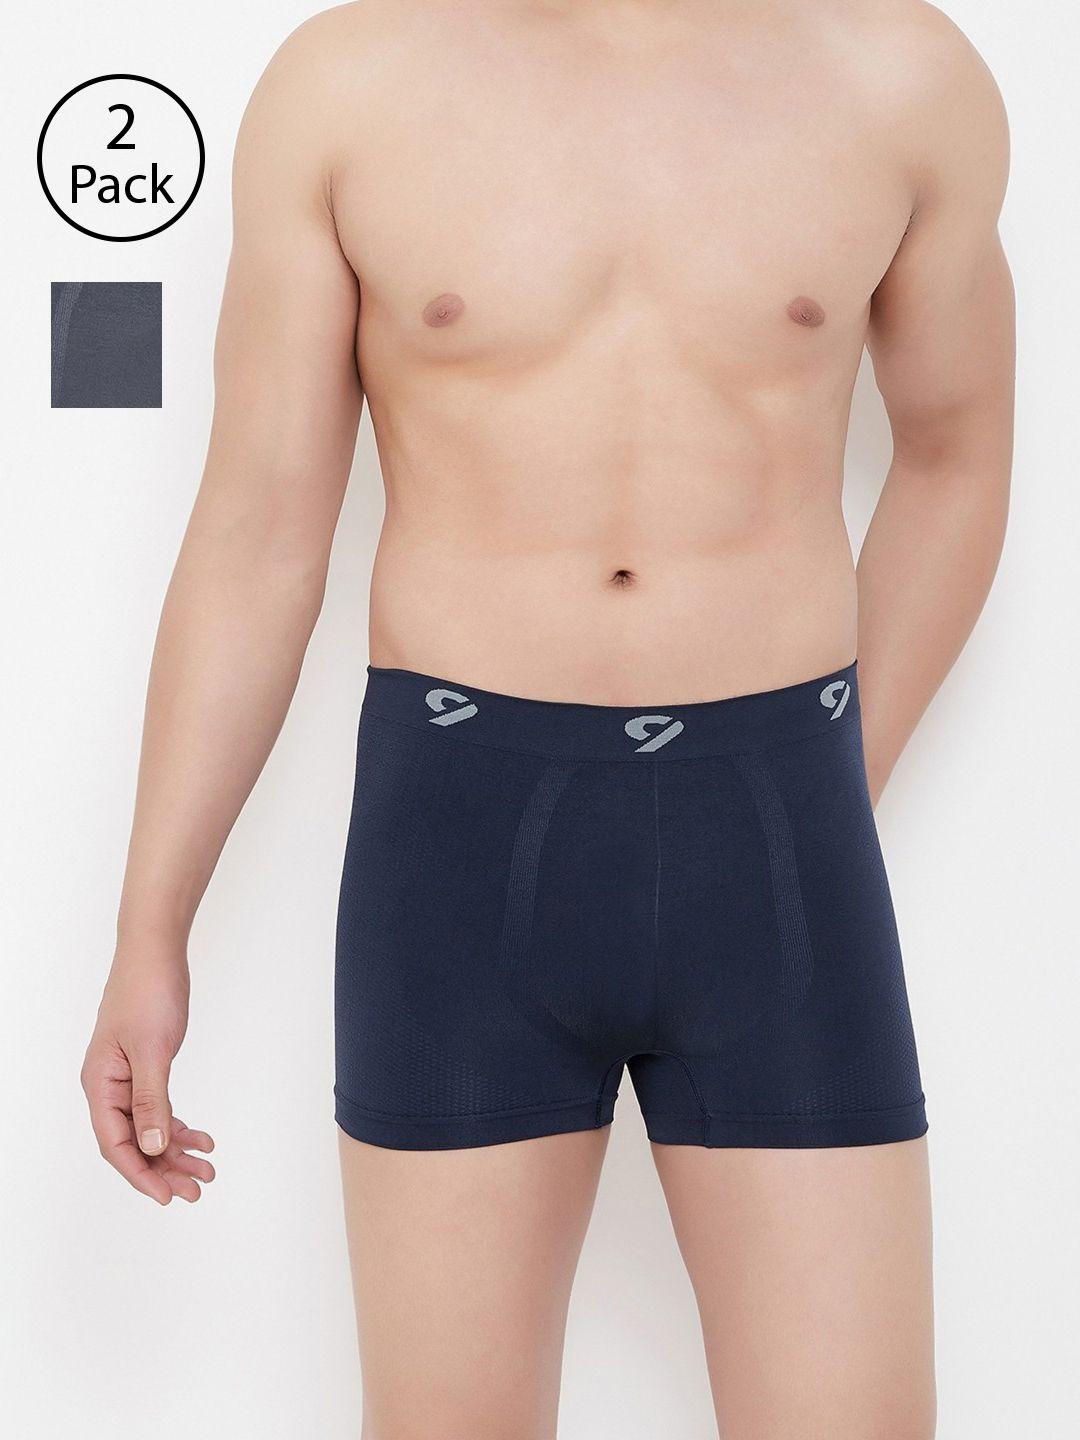 c9 airwear men pack of 2 solid seamless trunks p601navy_p602chrcl